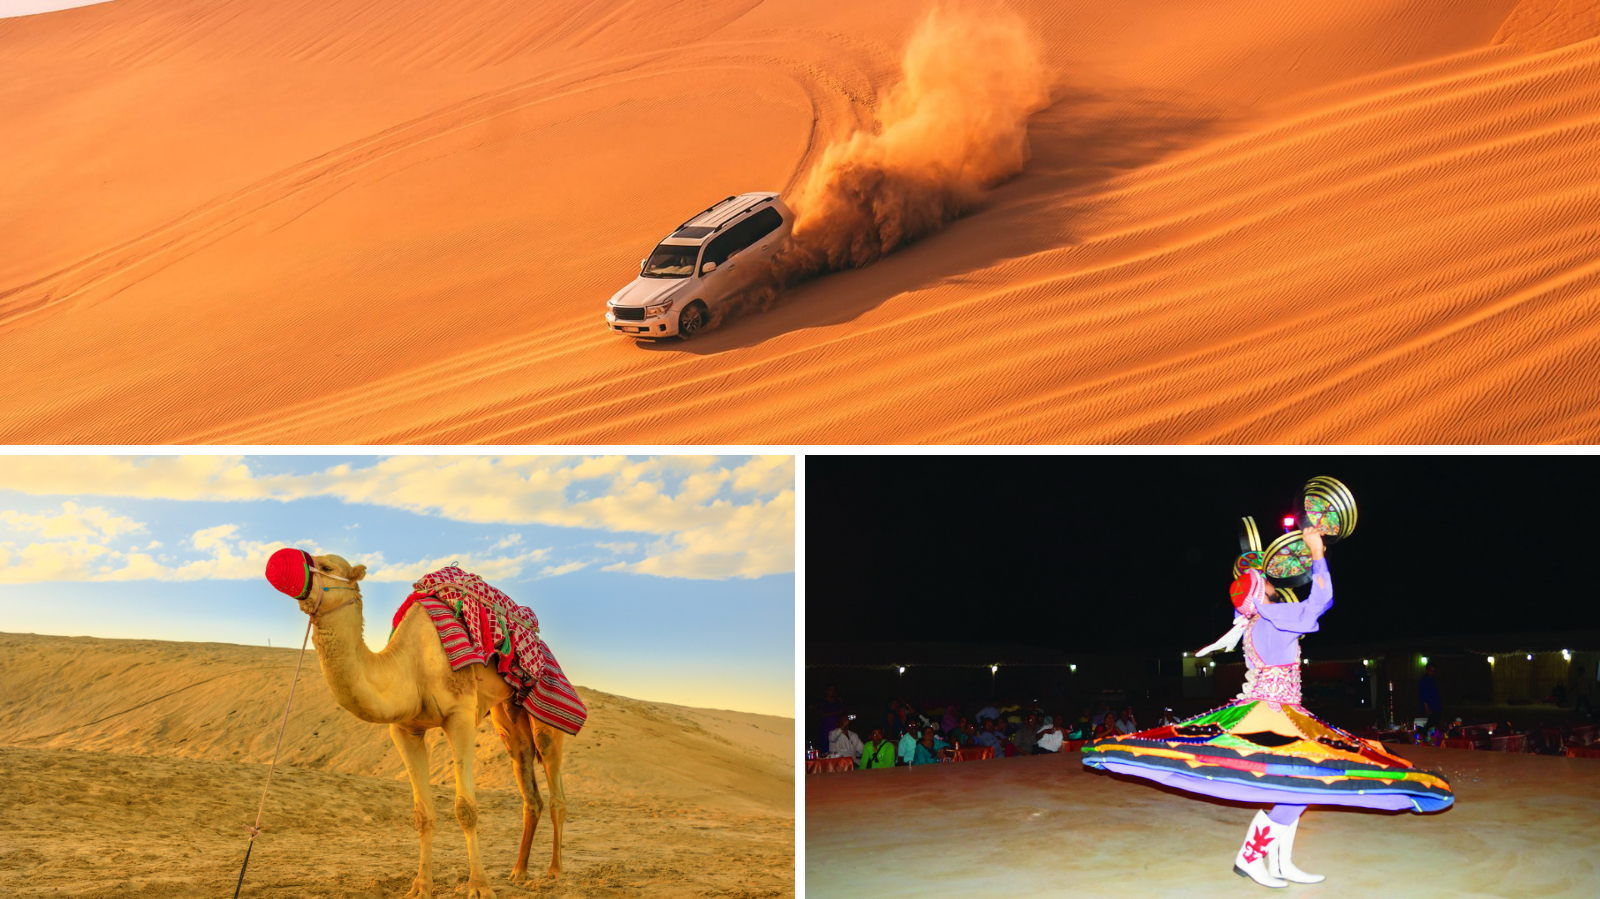 Desert Safari with Dinner and Entertainment (Private Vehicle)